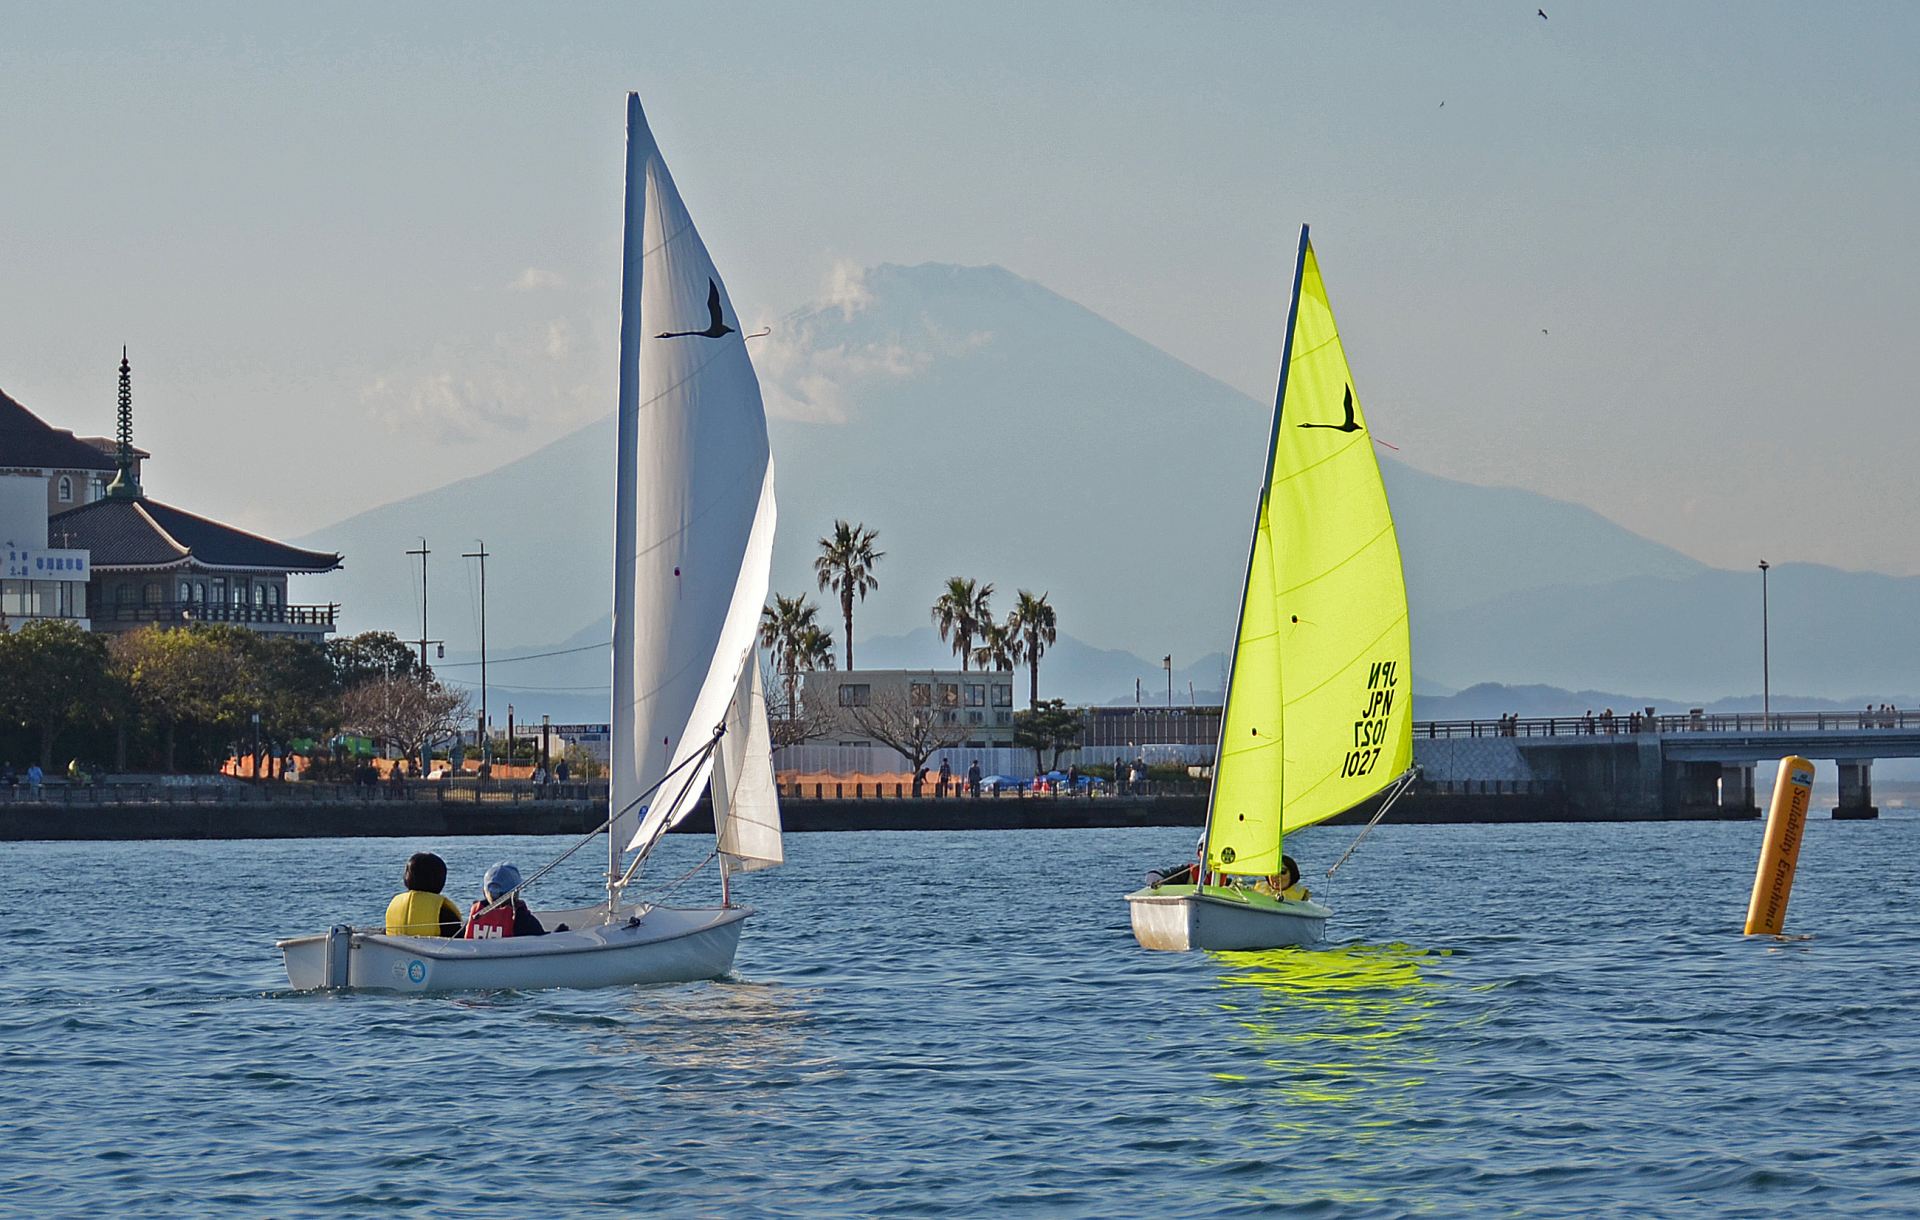 Beginners are welcomed to the sailing experience.